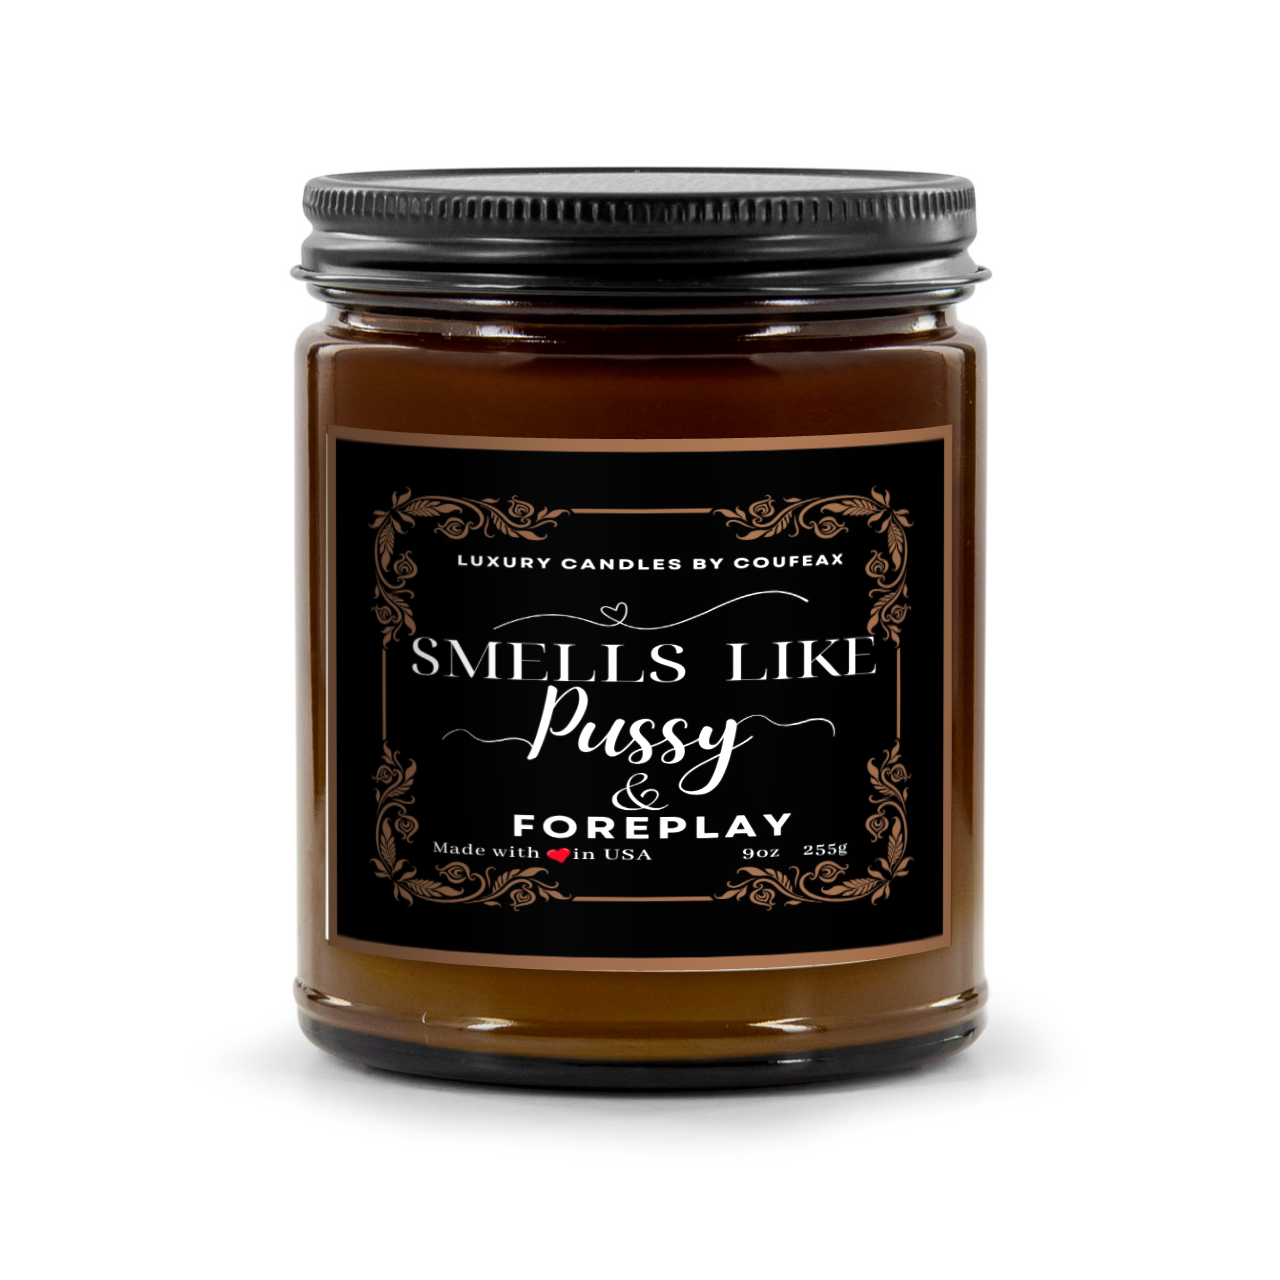 Smells Like Pussy & Foreplay Candle